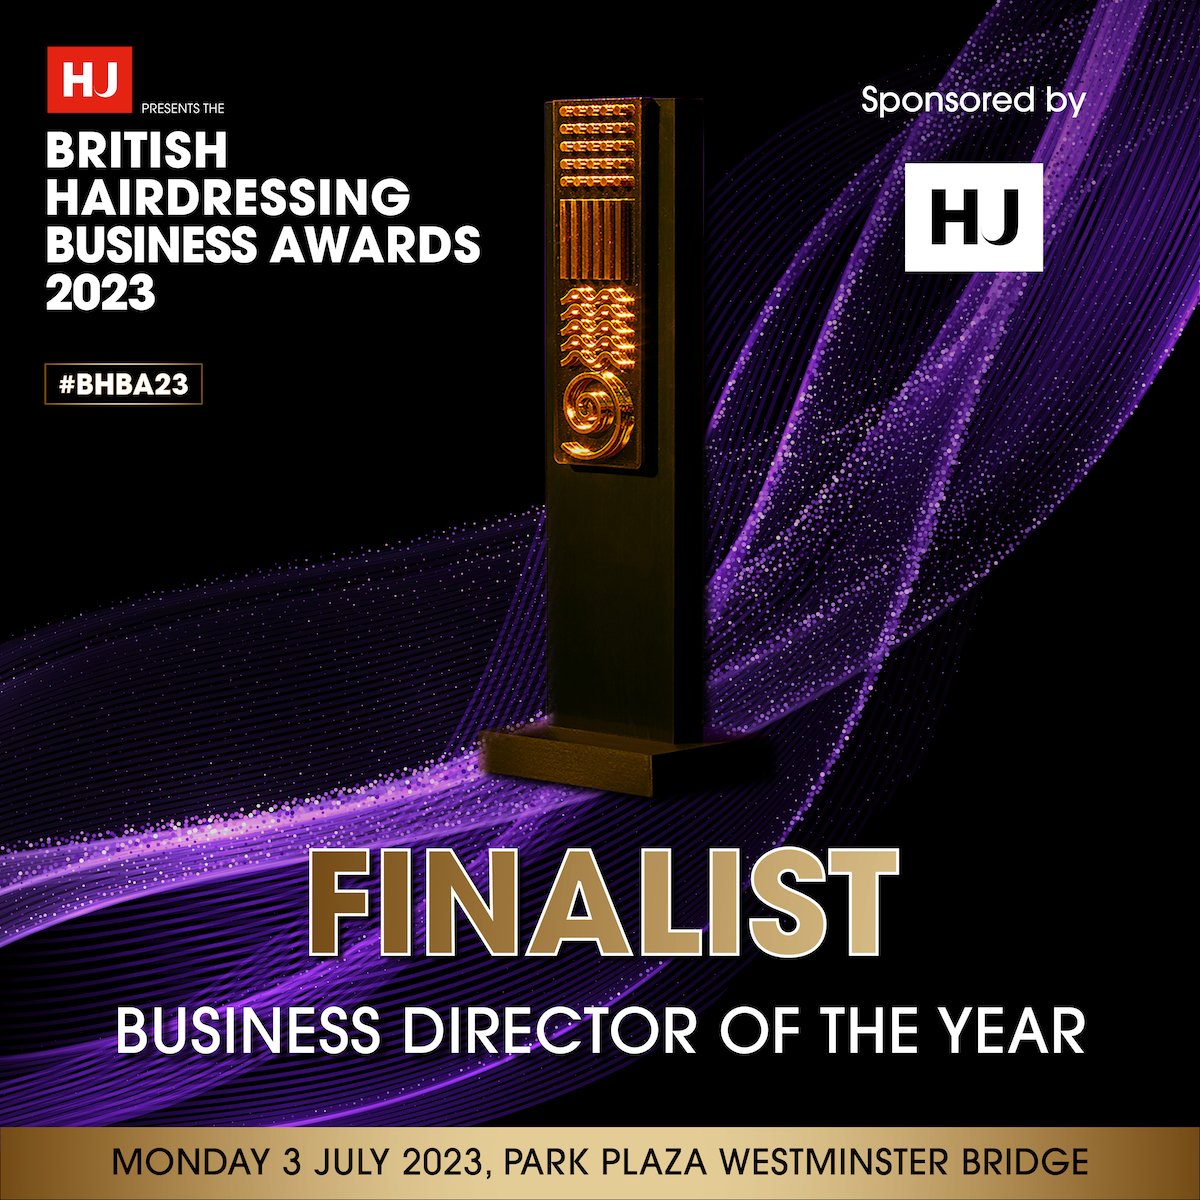 Tony Scoops ‘Business Director of the Year’ Award Nomination at BHBA Awards